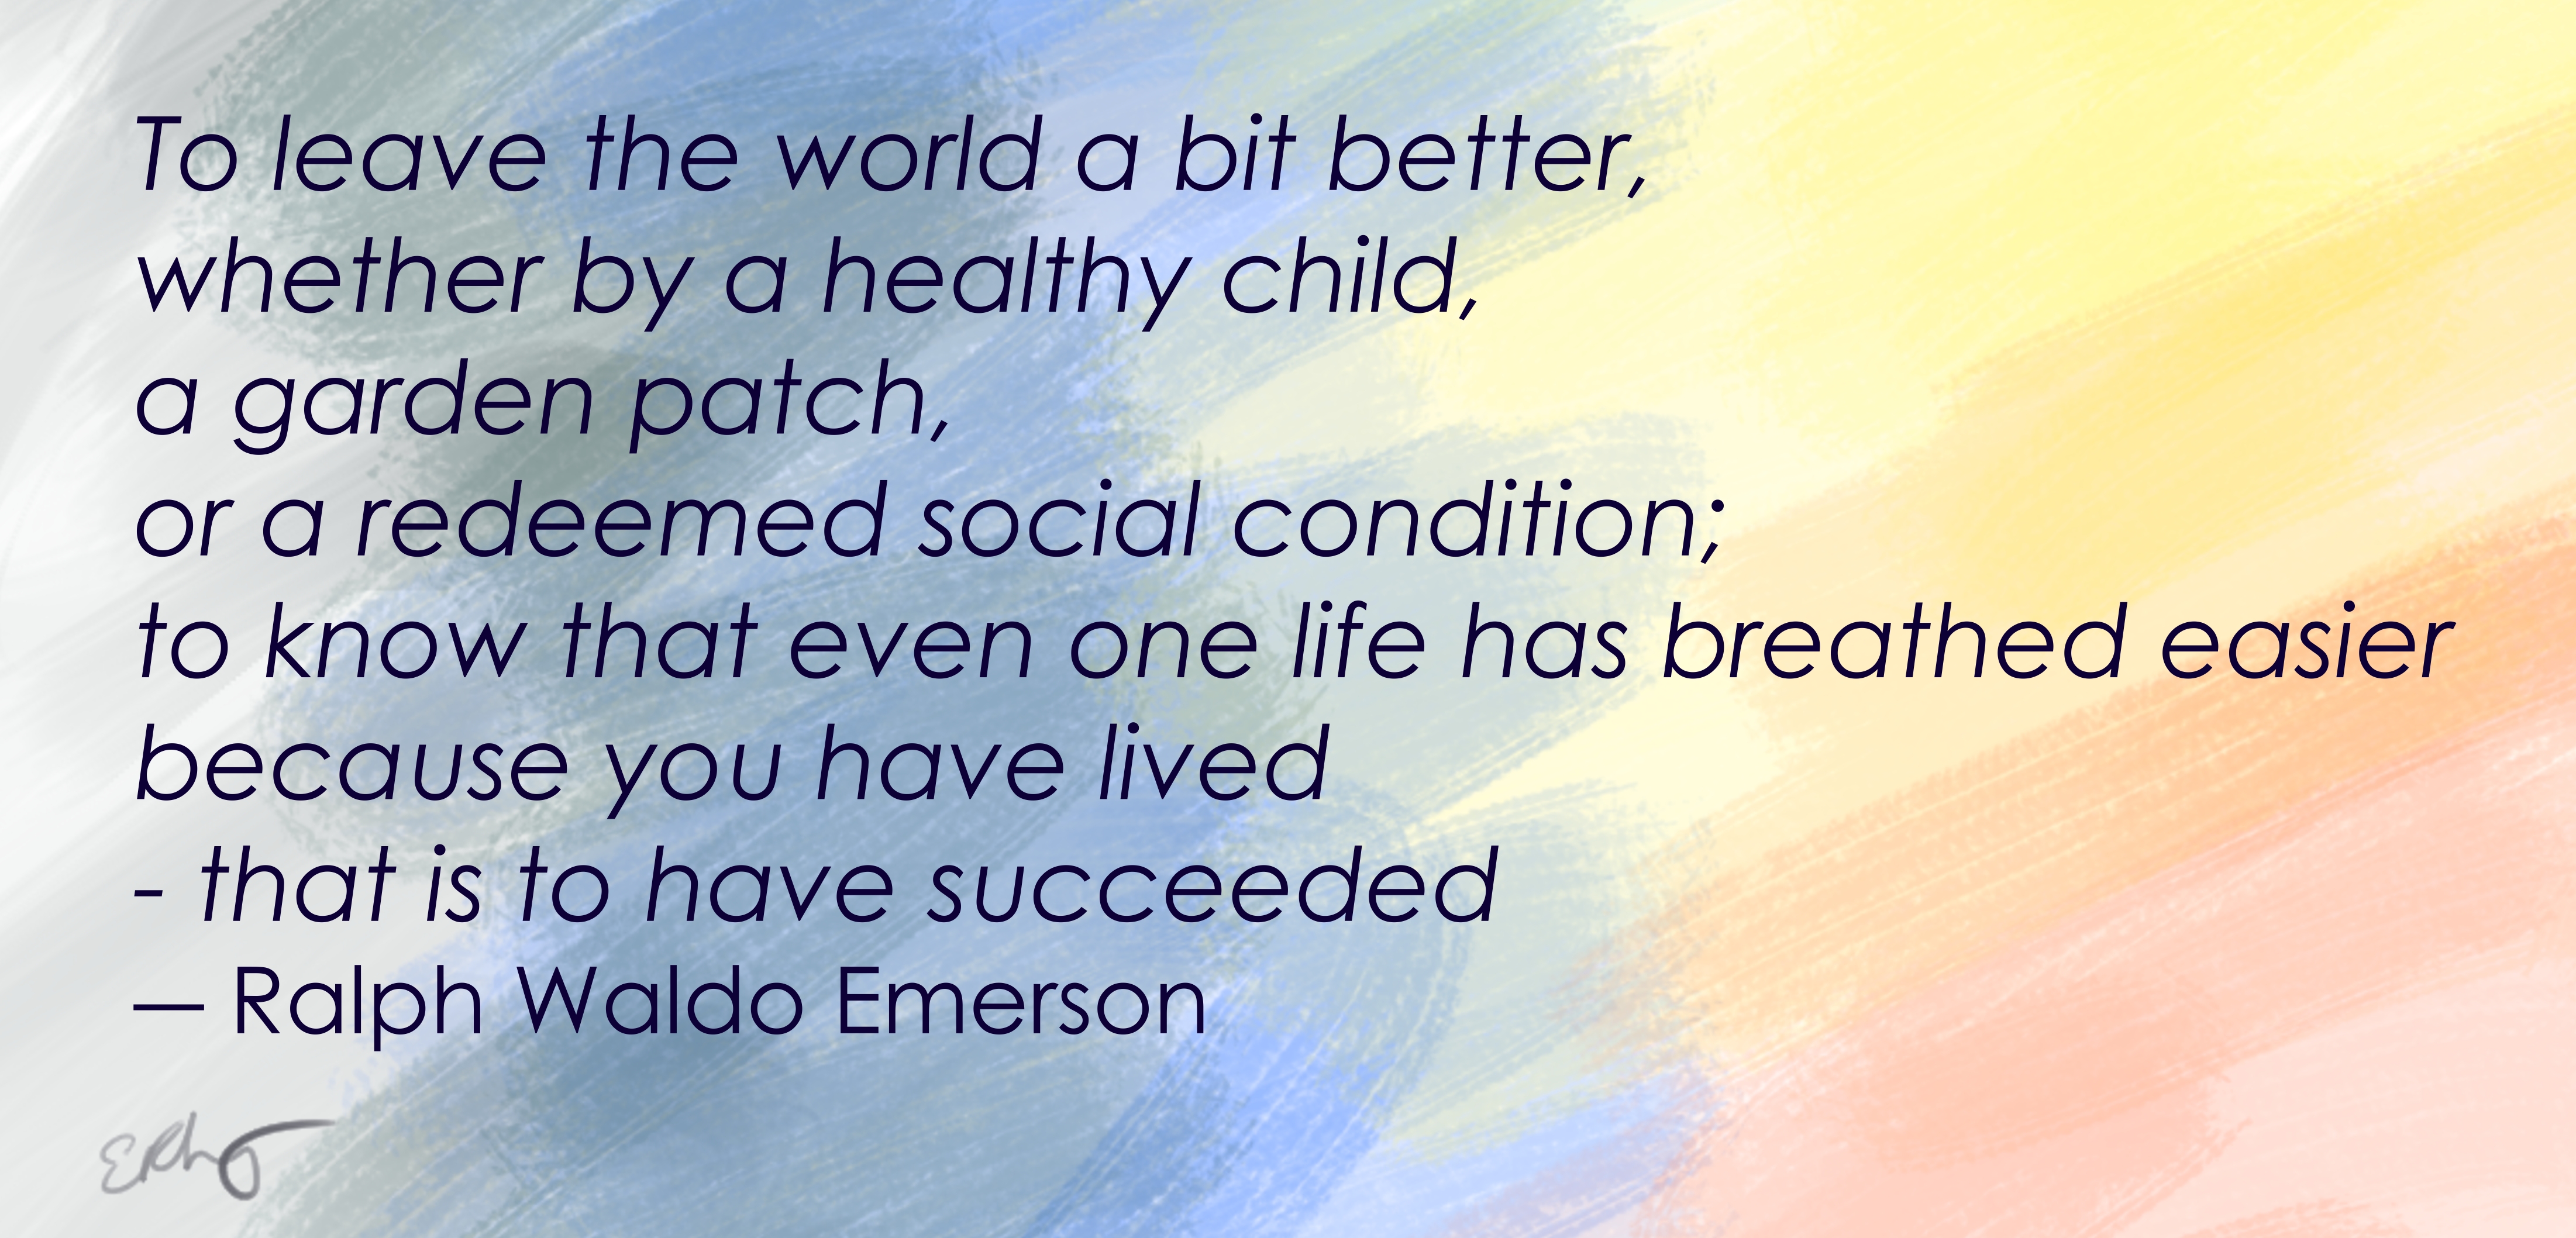 Quote from Ralph Waldo Emerson: To leave the world a bit better, whether by a healthy child, a garden patch, or a redeemed social condition; to know that even one life has breathed easier because you have lived - that is to have succeeded. 